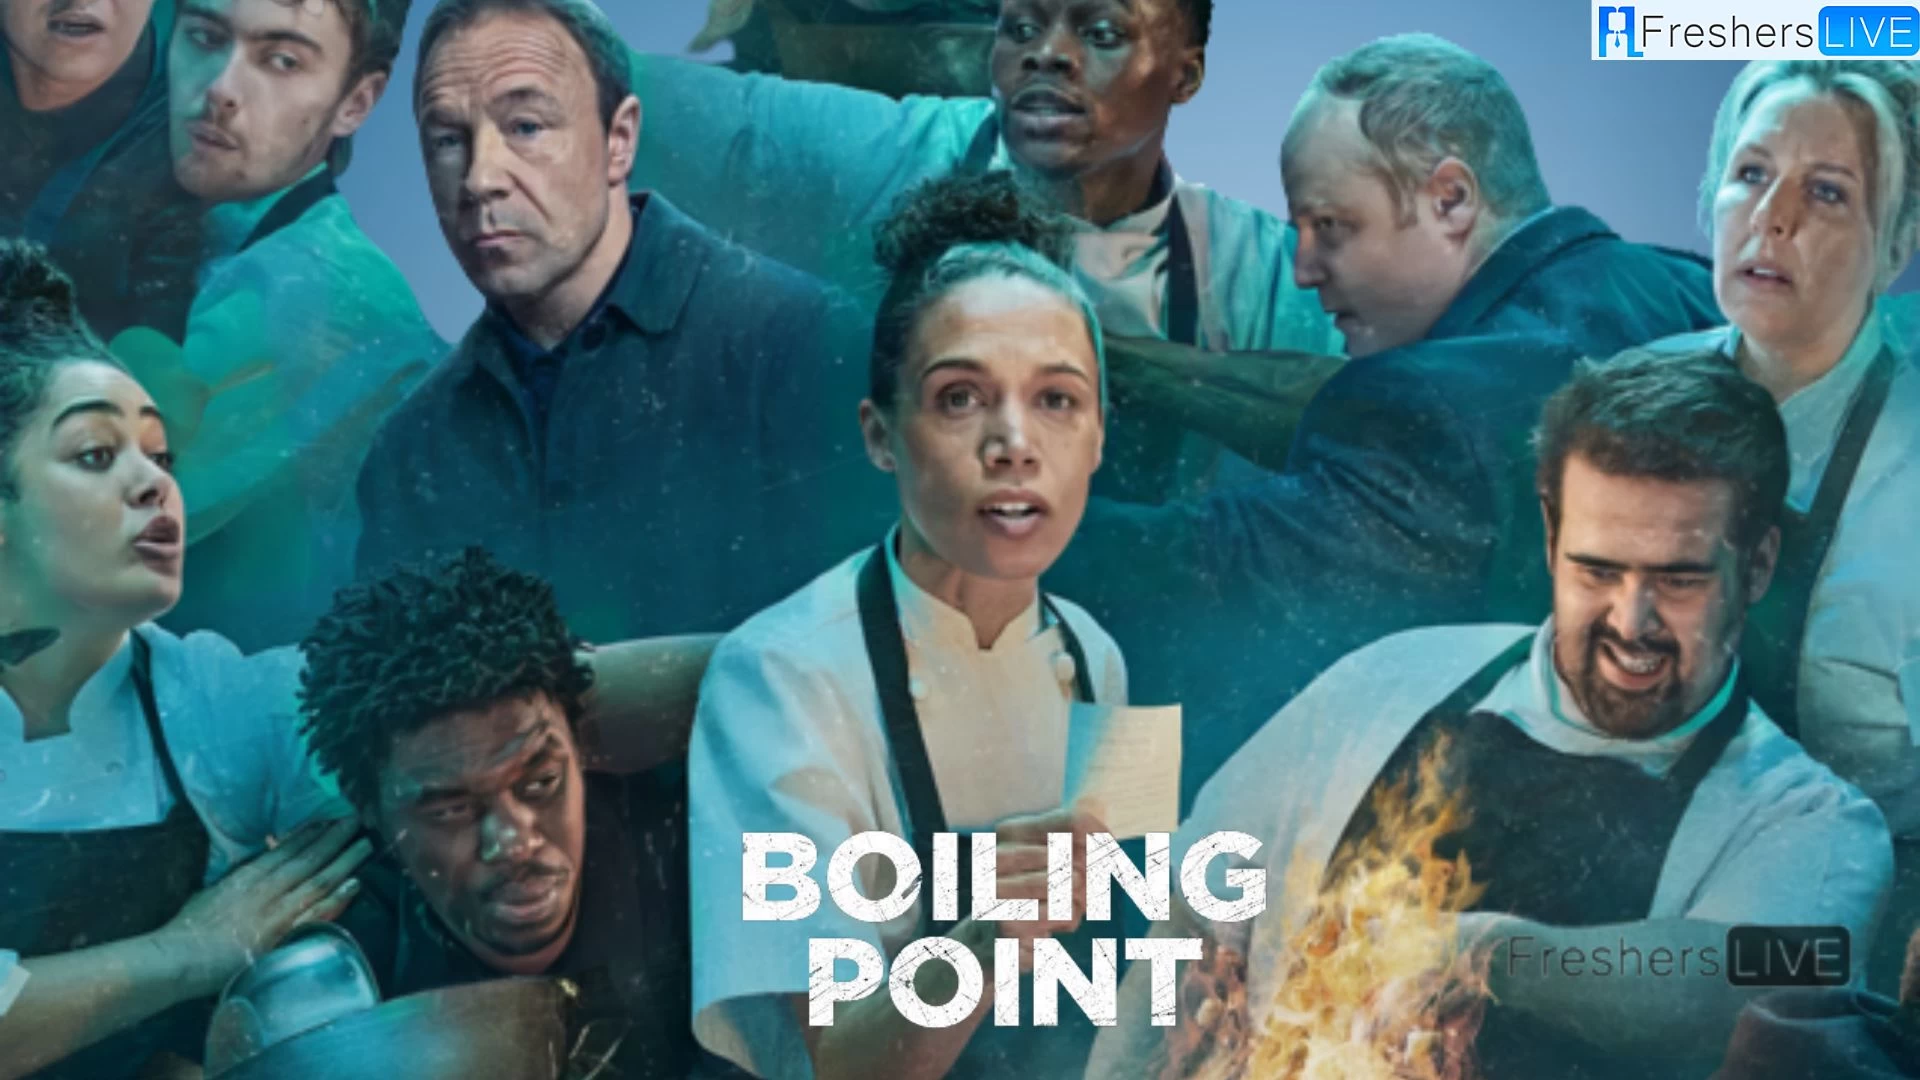 Is Boiling Point Based on a True Story? Where is Boiling Point filmed?